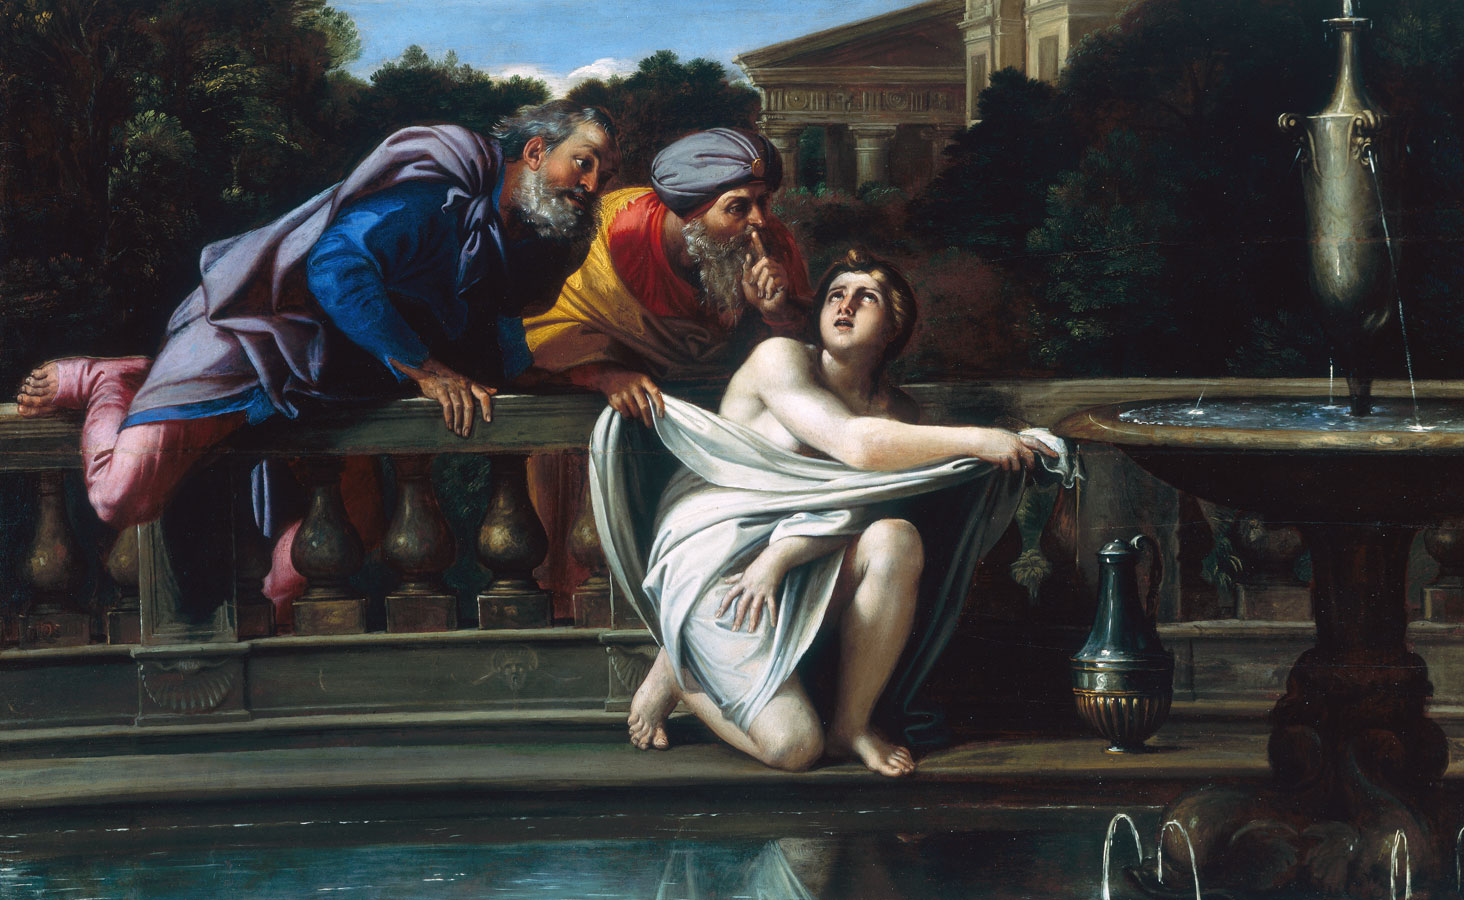 Painting of biblical story of Susannah discovered bathing nude by the religious elders